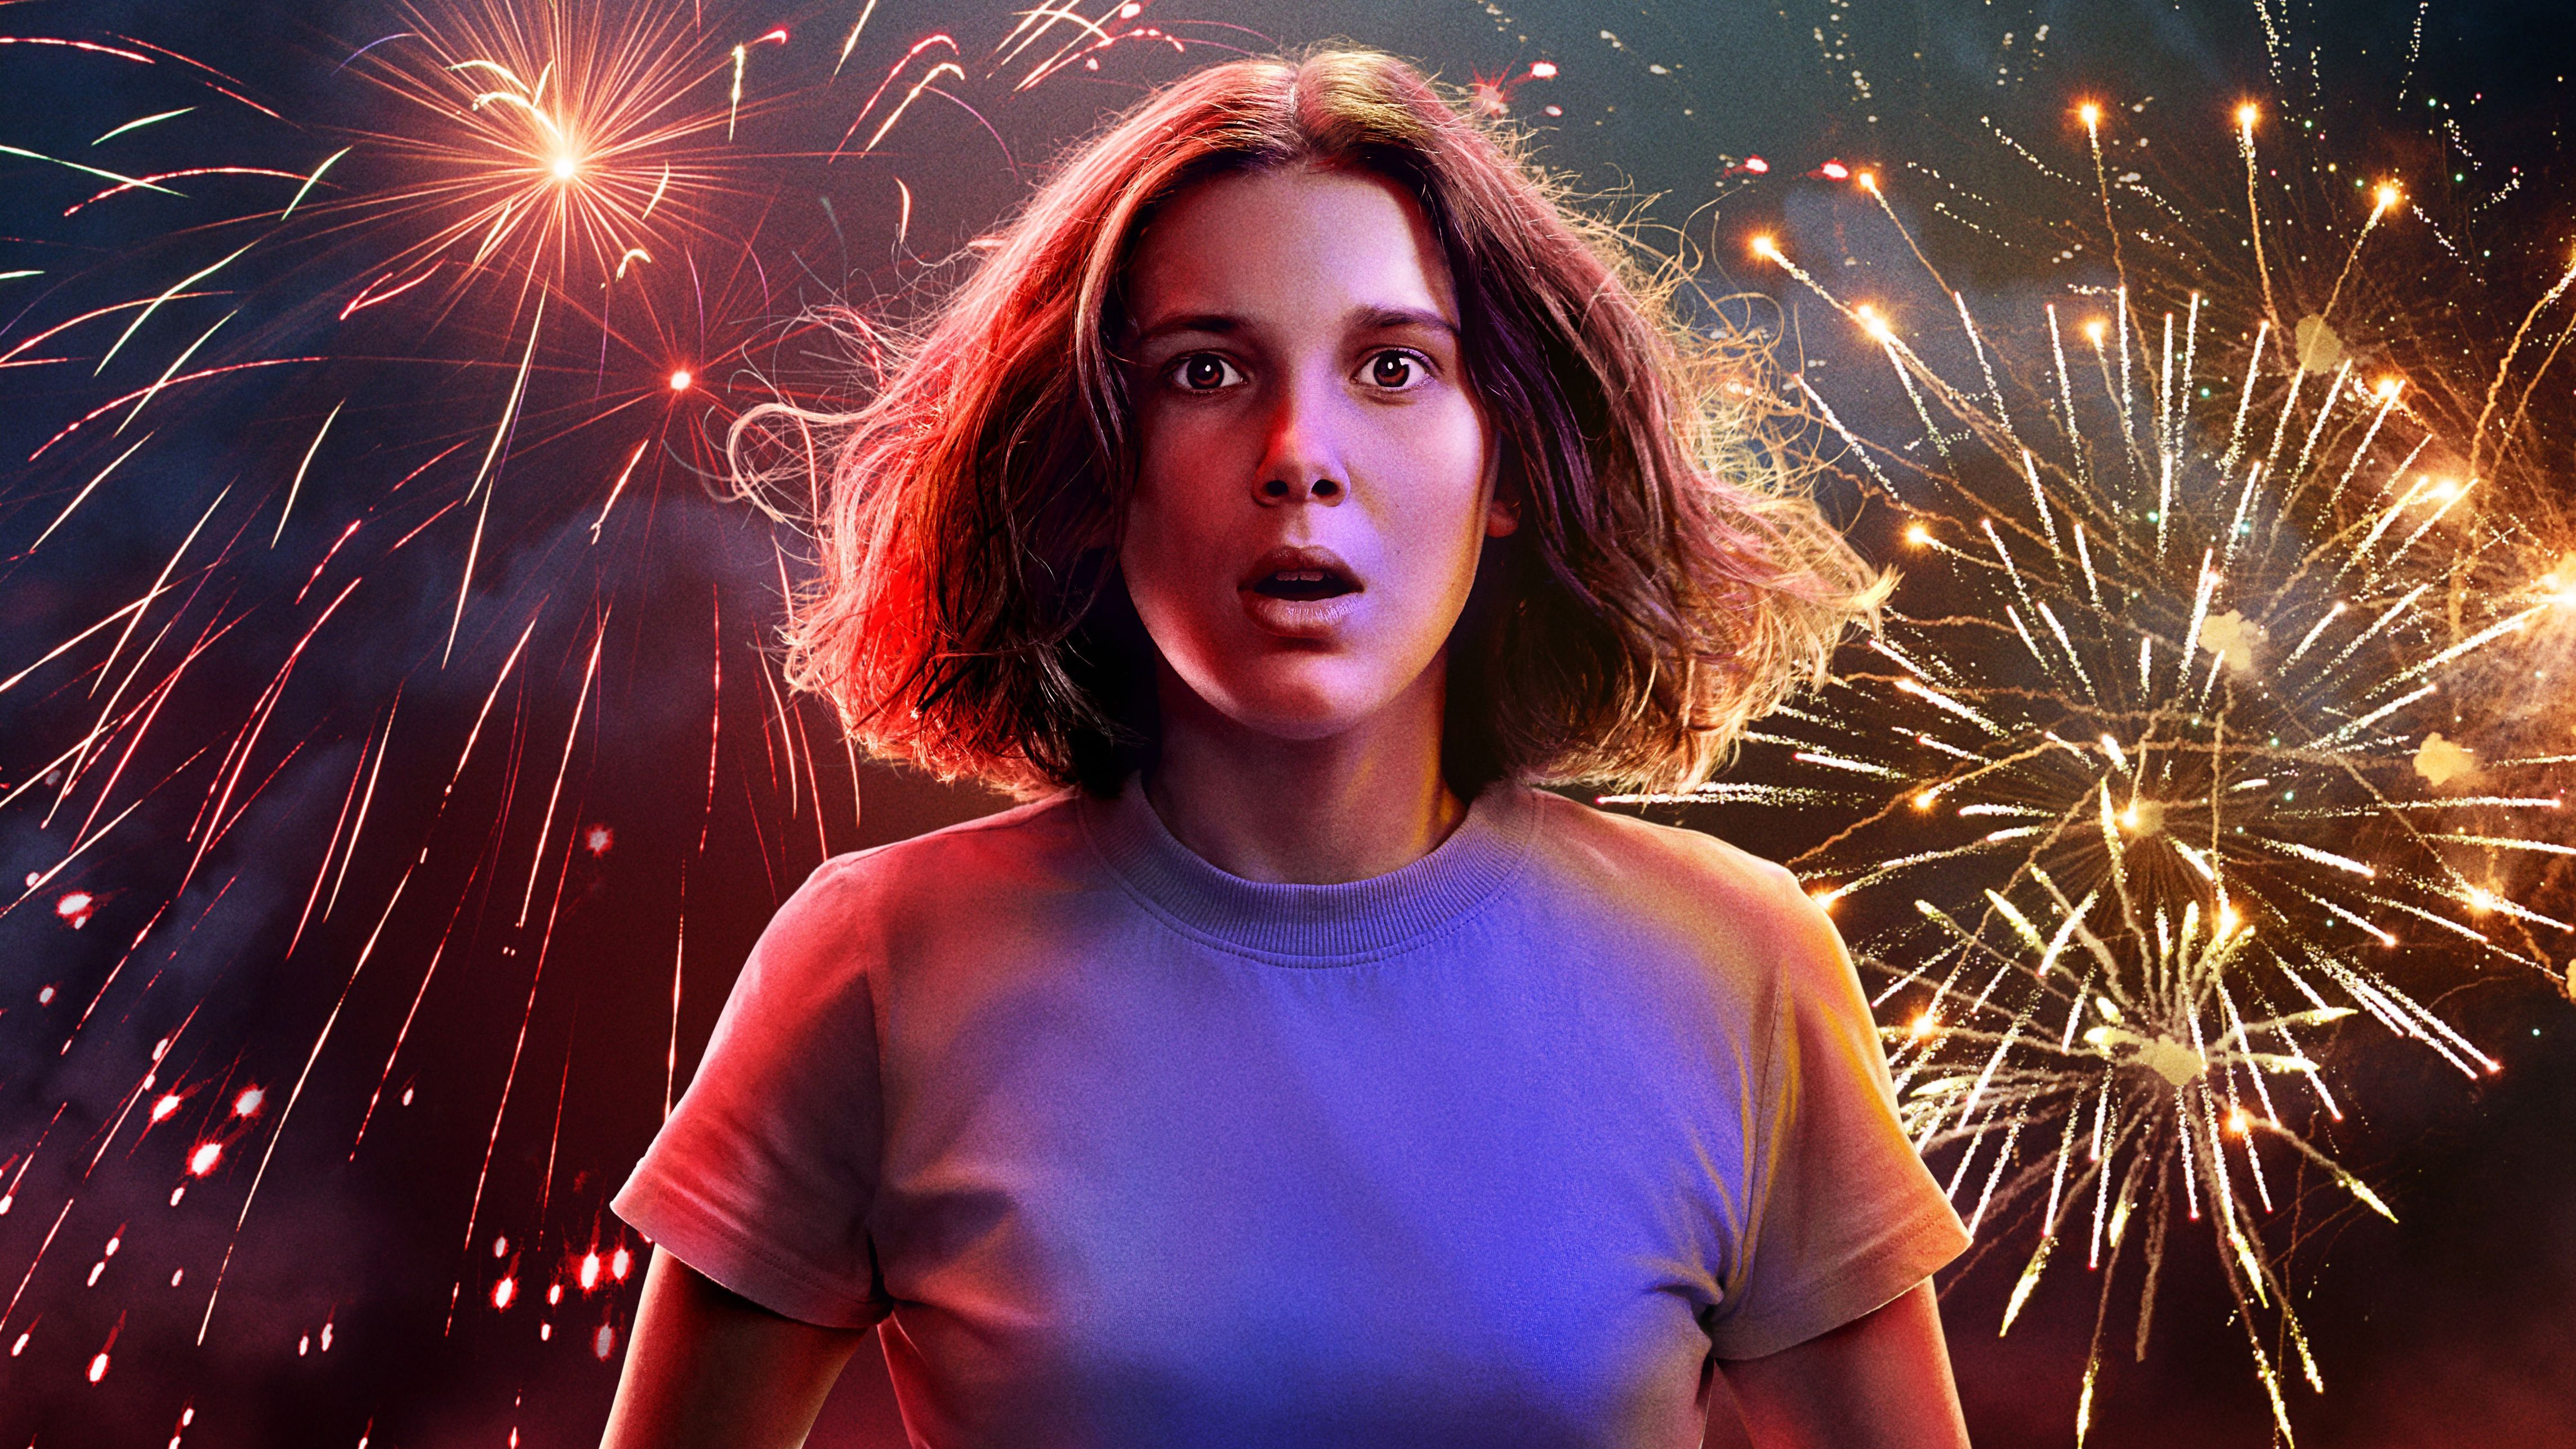 Stranger Things Season 4 New Release Date, Trailer Netflix Delays the Premiere due to COVID-19